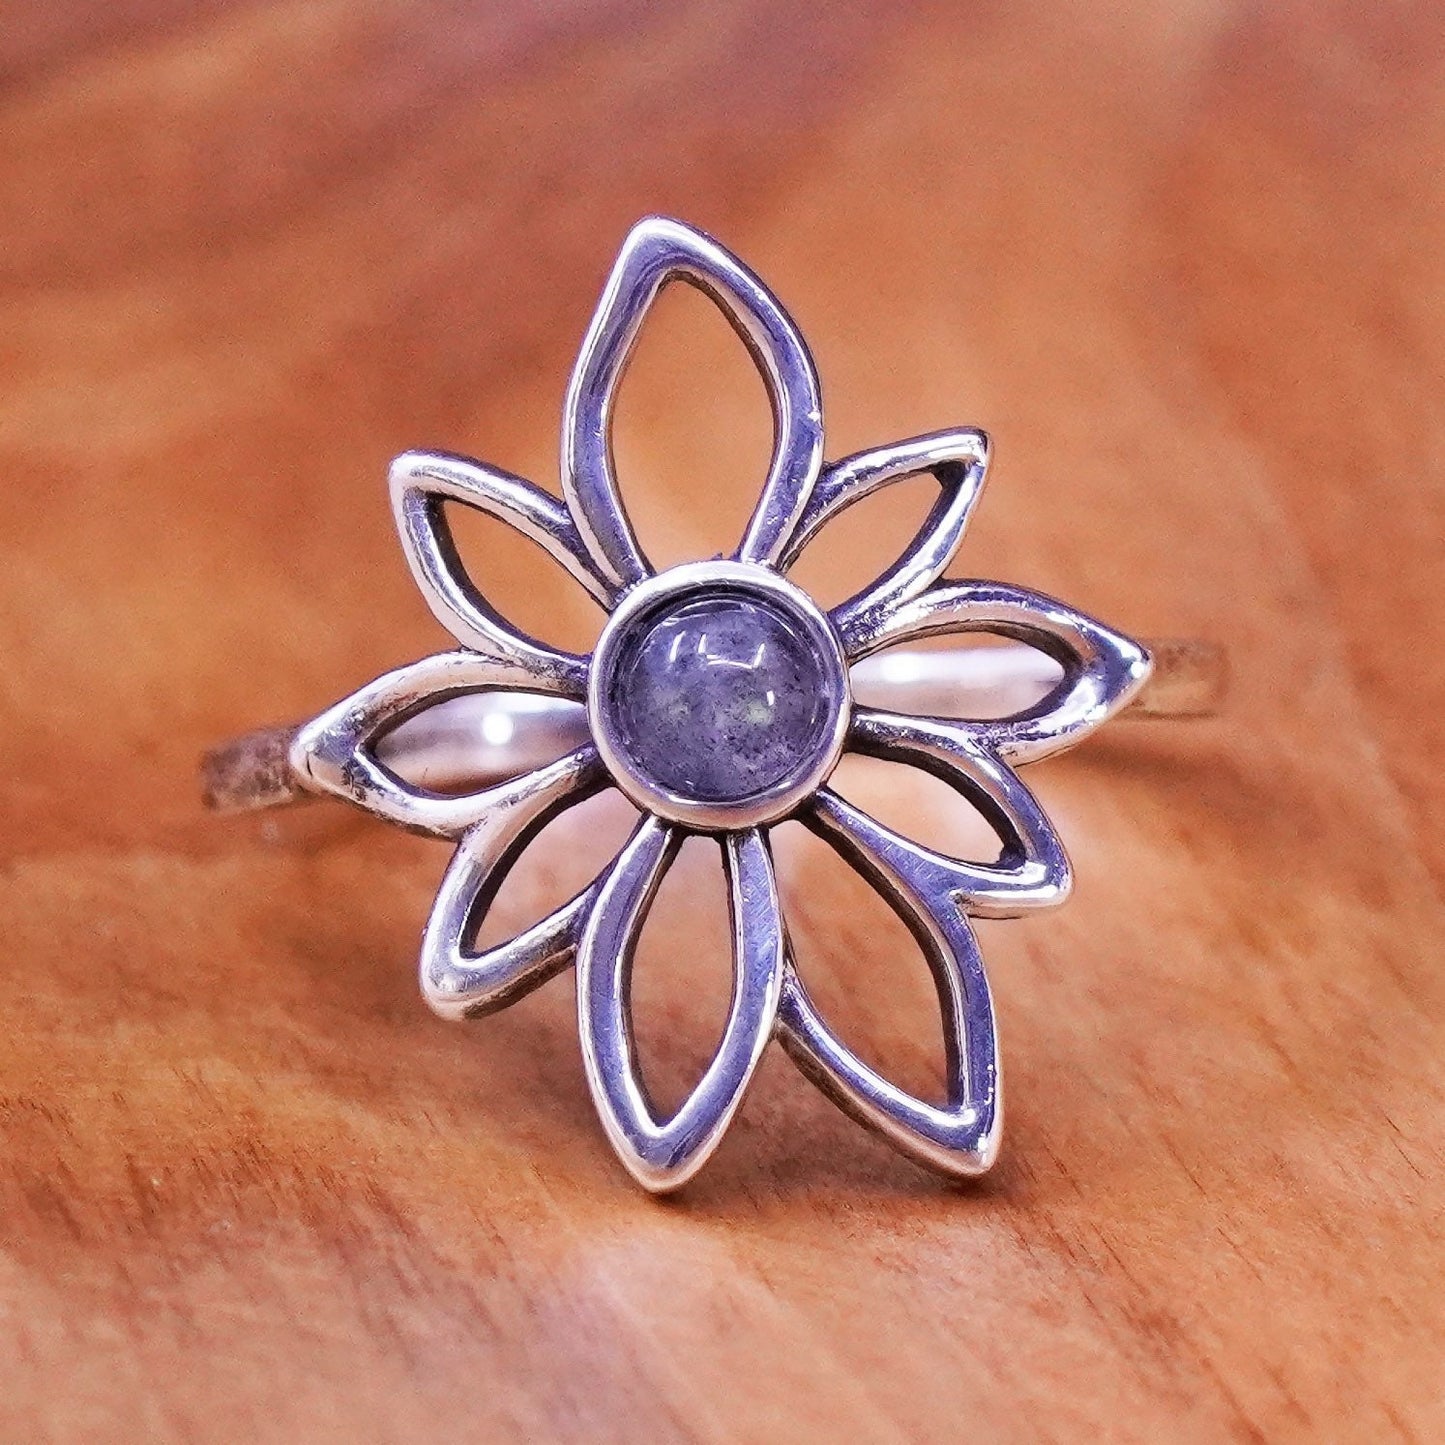 Size 8.5, vintage sterling 925 silver handmade flower ring with labradorite